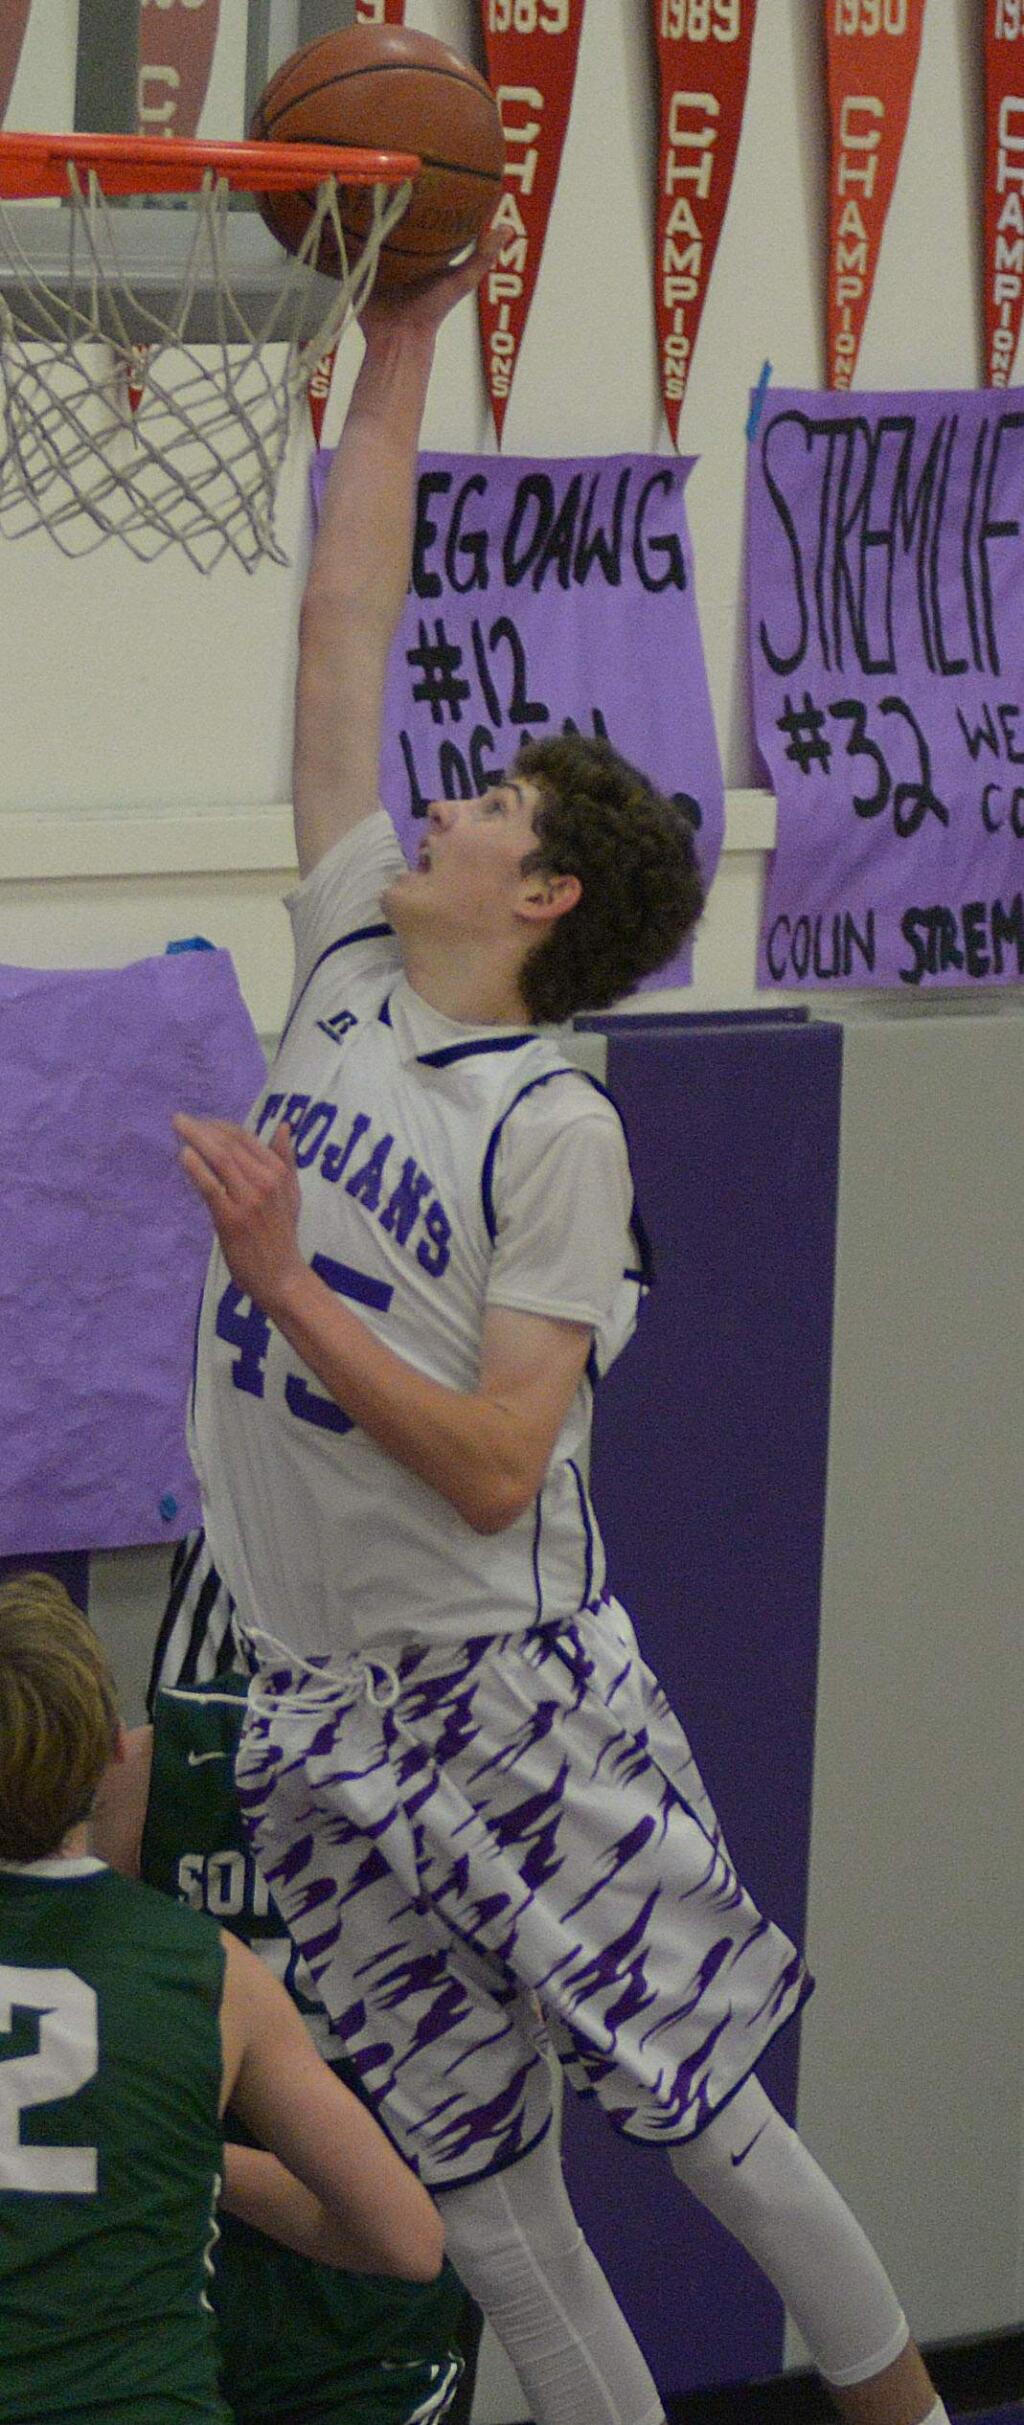 SUMNER FOWLER/FOR THE ARGUS-COURIERJoey Potts, shown in Petaluma's first meeting with Sonoma Valley, sank two free throws with 1.6 seconds left to beat the Dragons, 49-47, in a game played Monday in Sonoma.